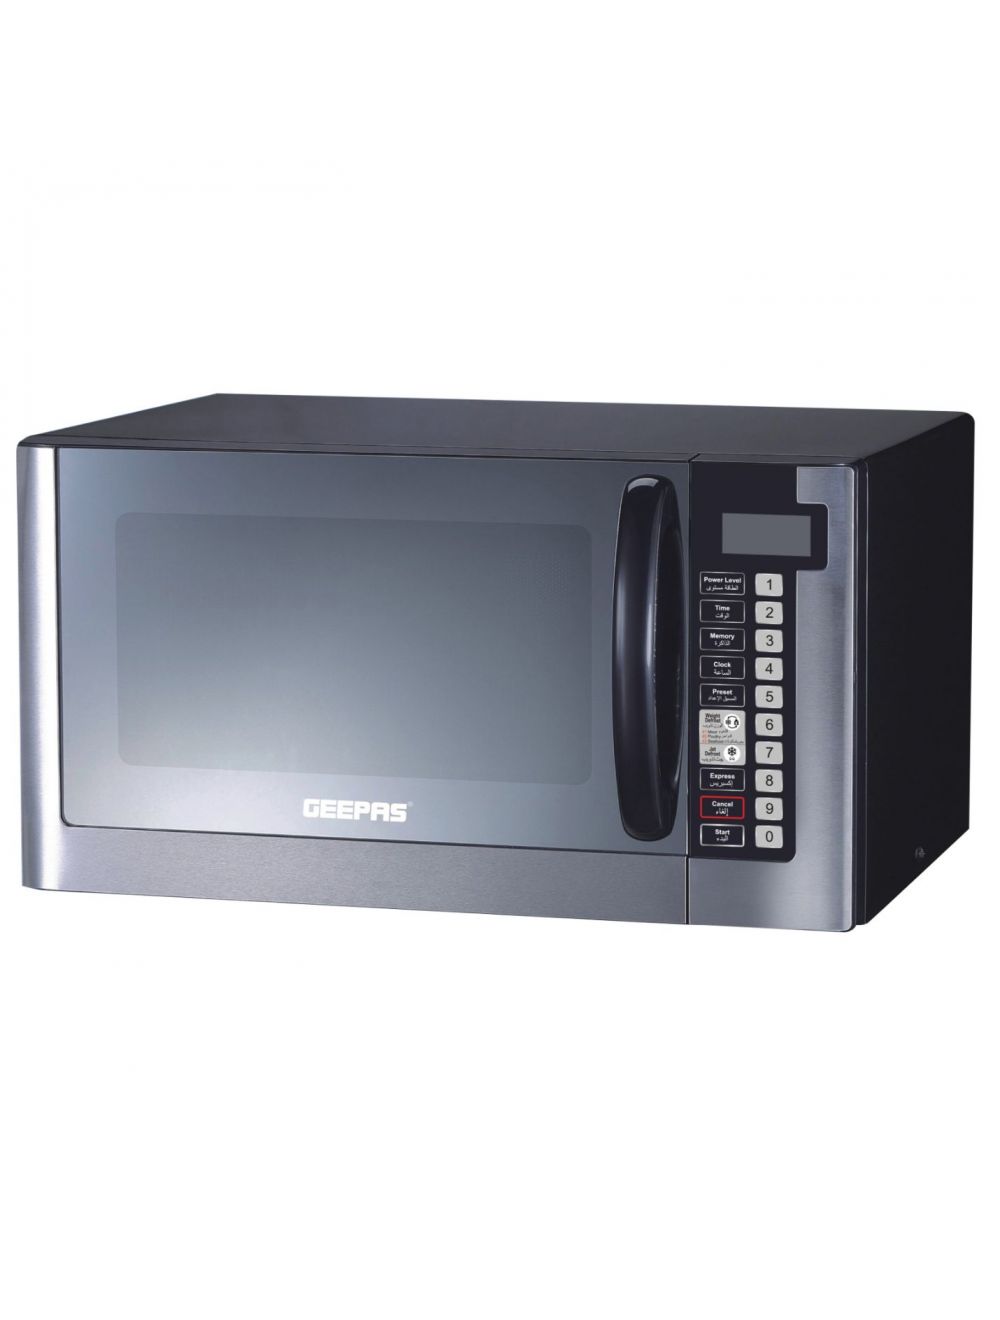 Geepas Microwave Oven 45L1000w - GMO1898